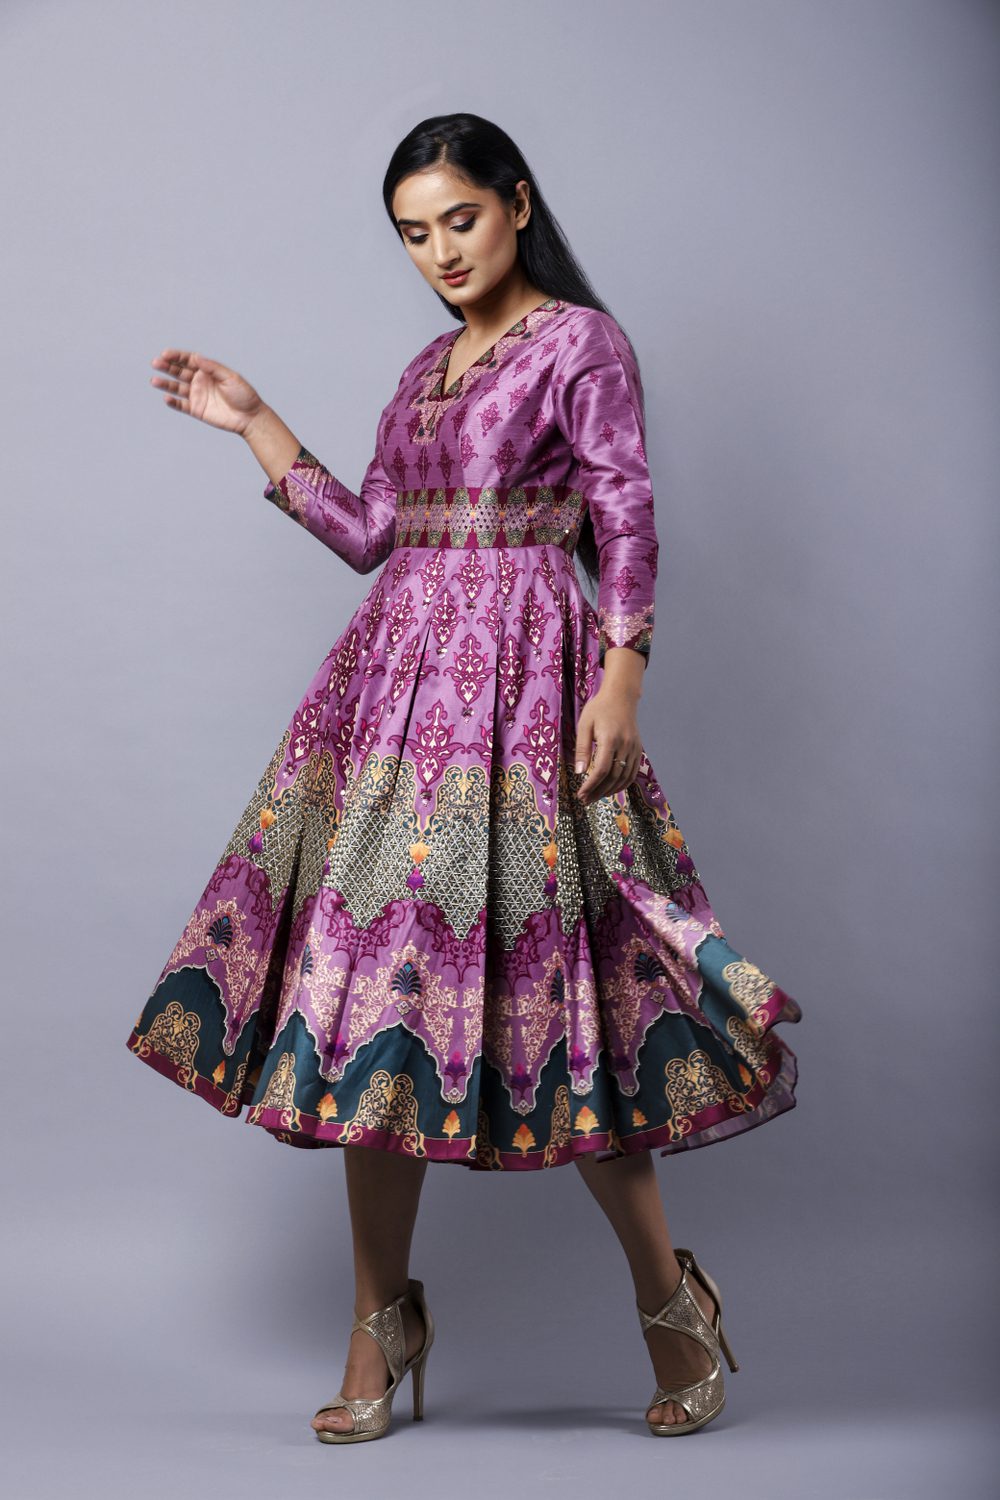 Buy Turkish Dresses Online In India - Canada - USA at Folklore Collection | BuyTurkish Dresses in Toronto | Shop Turkish Dresses in New Jersey at Folklore